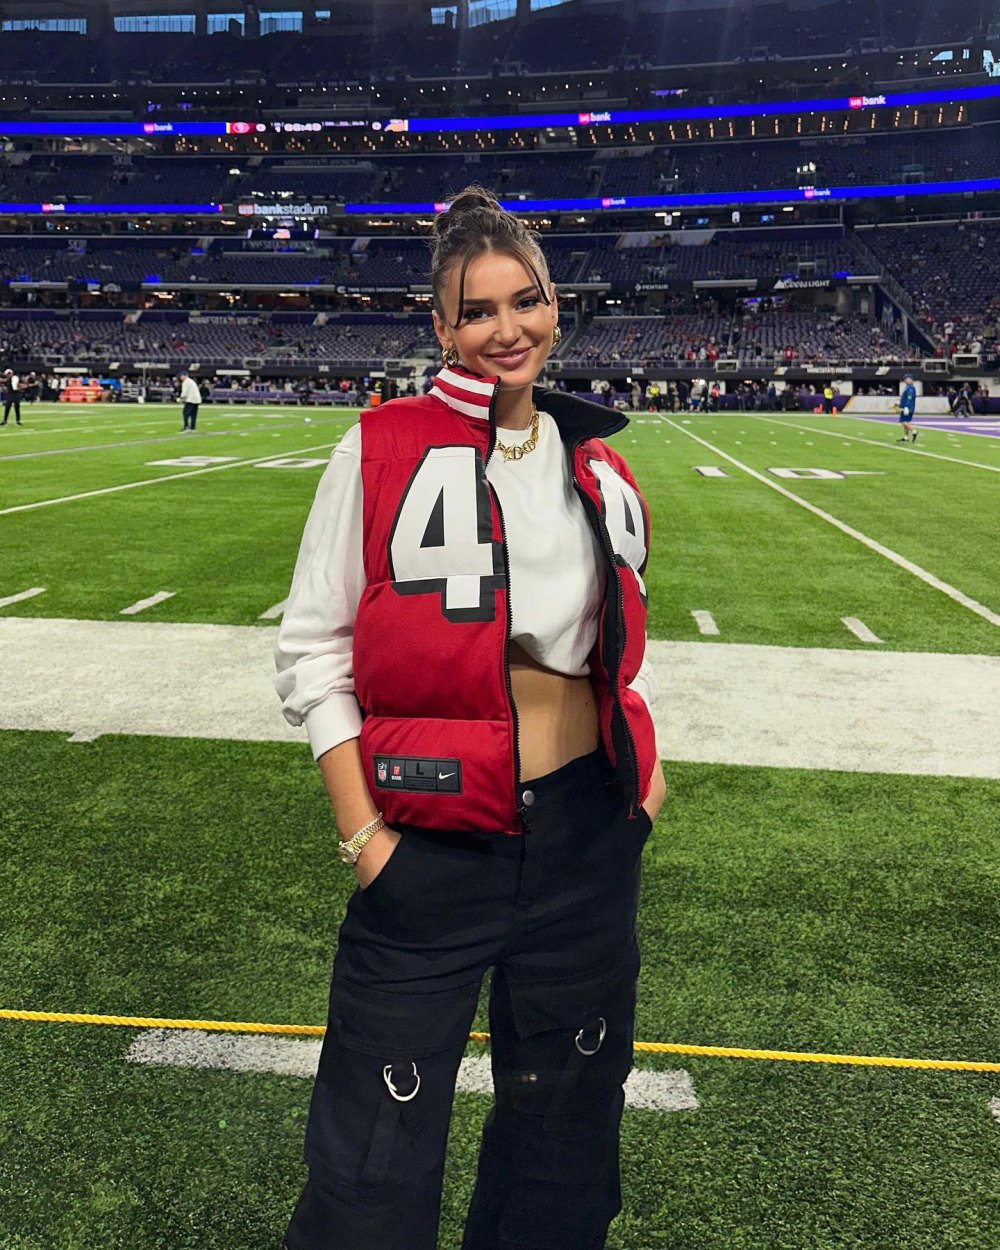 Kristin Juszczyk Reveals Secret Message Embroidered in Her Sleeve at 49ers Game